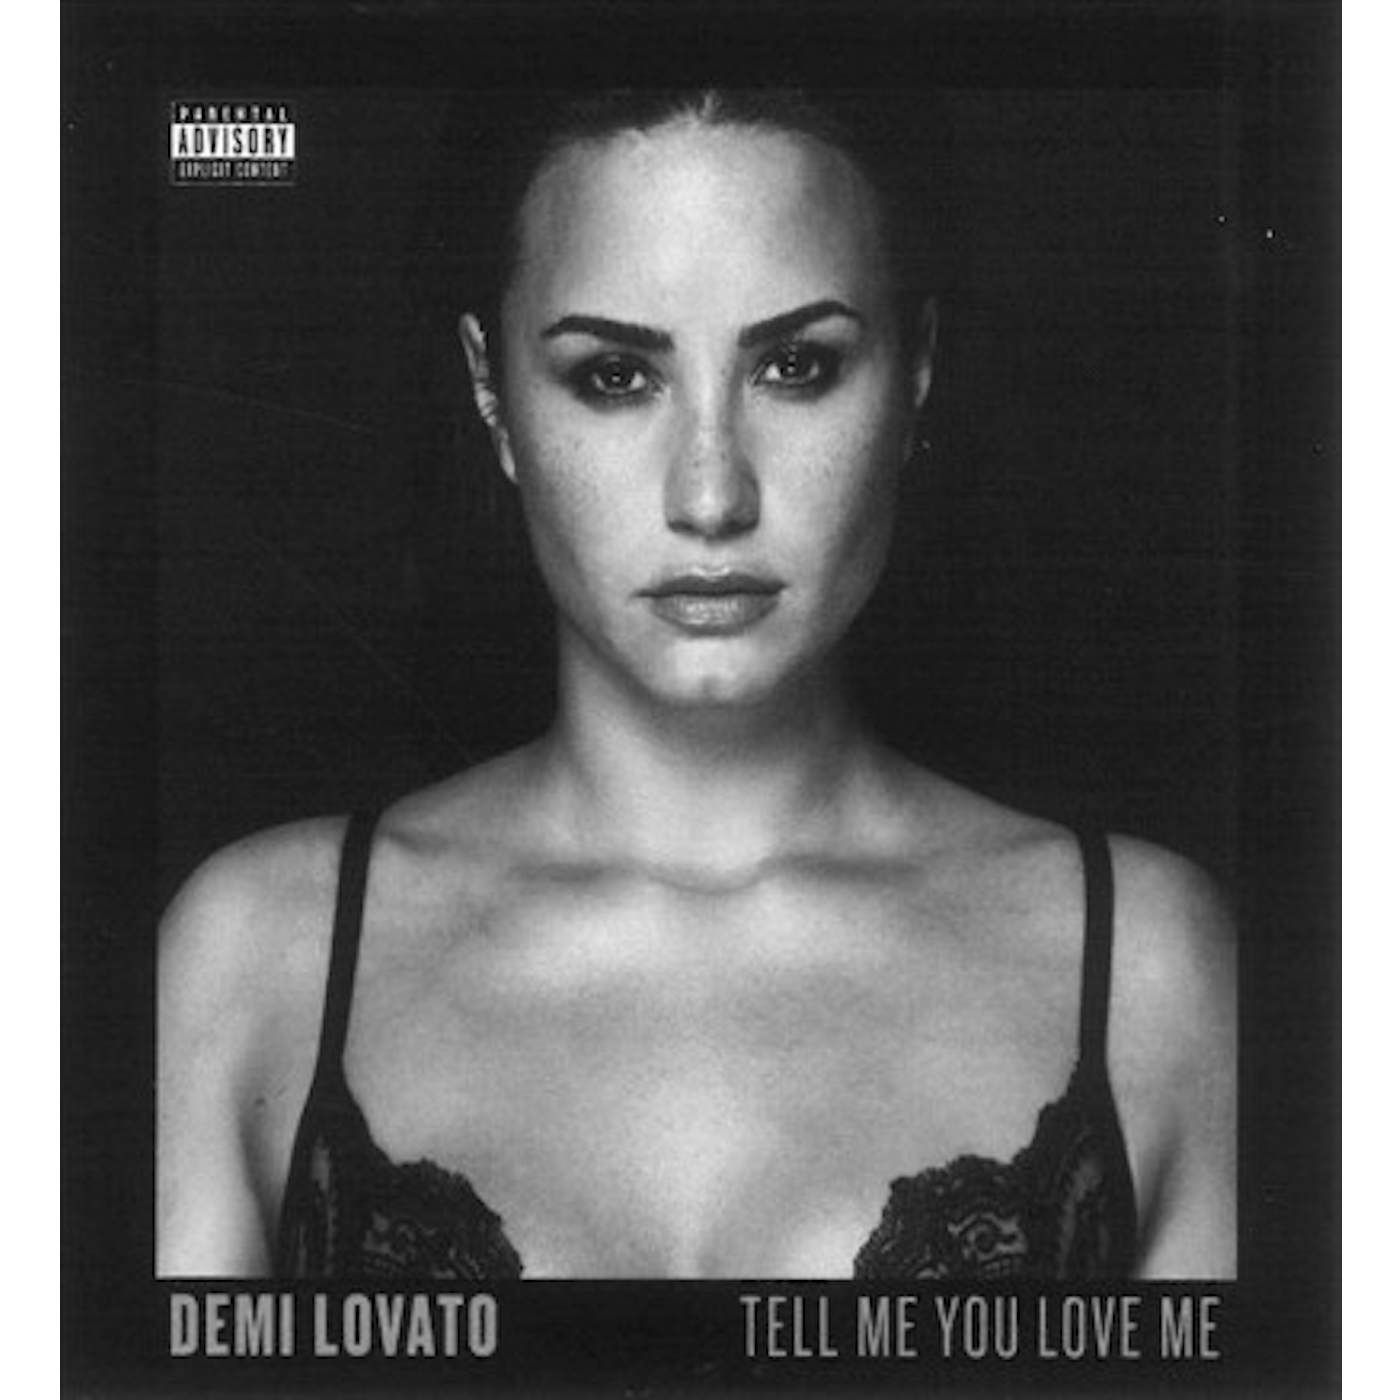 Demi Lovato TELL ME YOU LOVE ME (DELUXE EDITION) CD